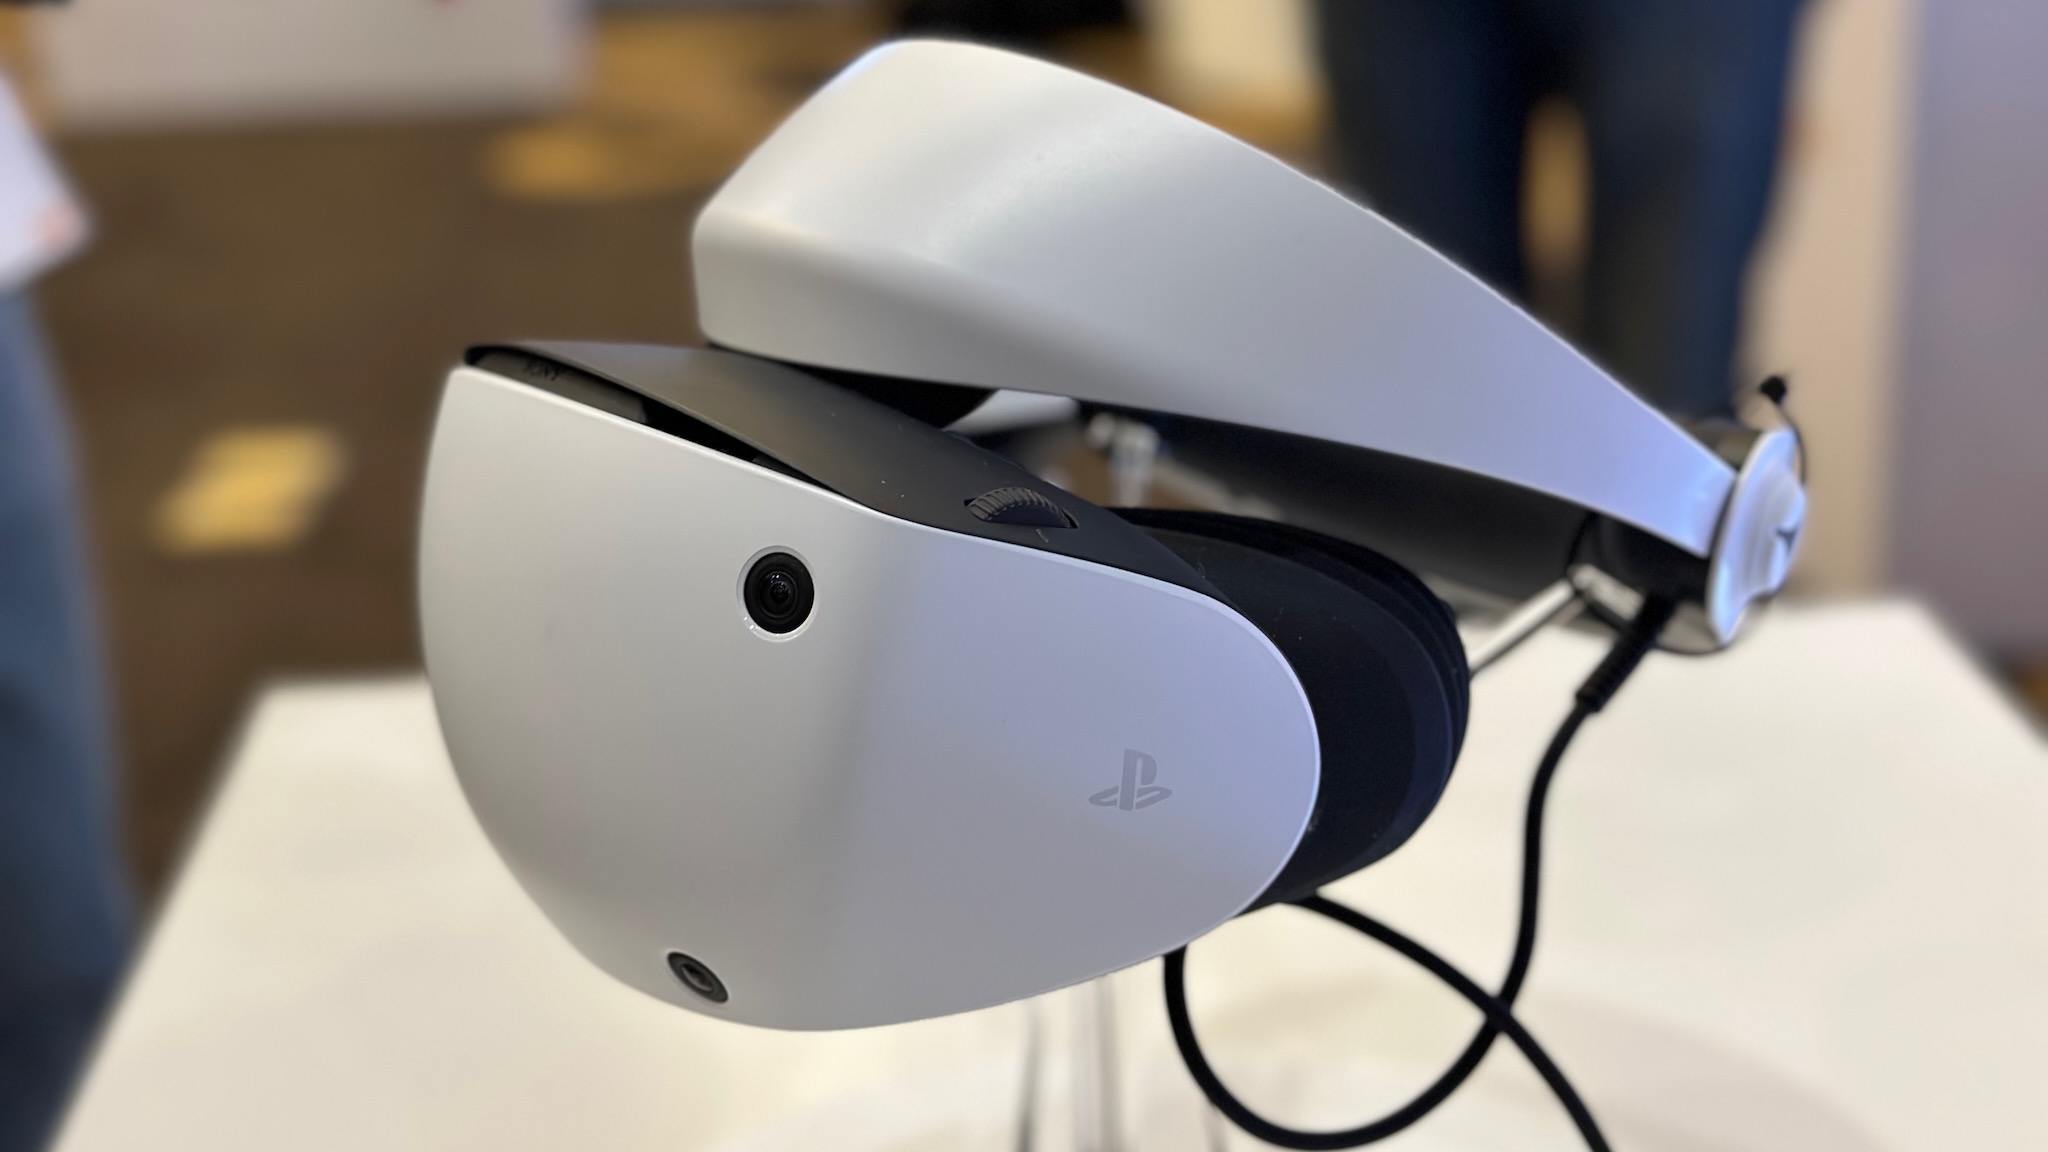 Sony launches PlayStation VR2 headset in India, and it's not cheap